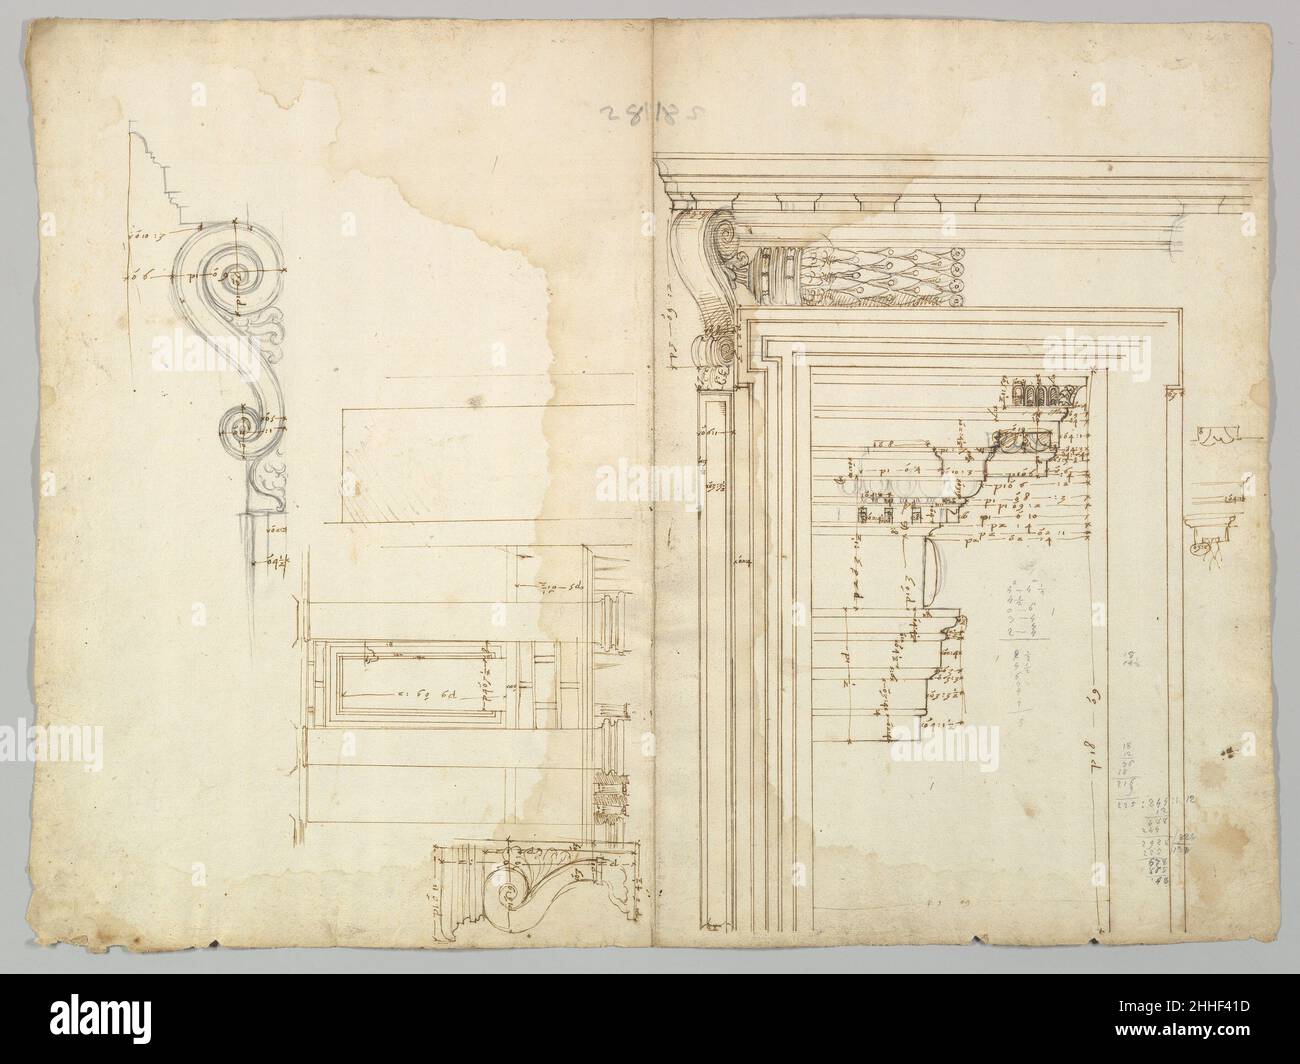 Palazzo Massimo alle Colonne, portico, elevation; portal, cornice, section; portal bracket, detail; fireplace, detail (recto) blank (verso) early to mid-16th century Drawn by Anonymous, French, 16th century French. Palazzo Massimo alle Colonne, portico, elevation; portal, cornice, section; portal bracket, detail; fireplace, detail (recto) blank (verso)  360456 Stock Photo